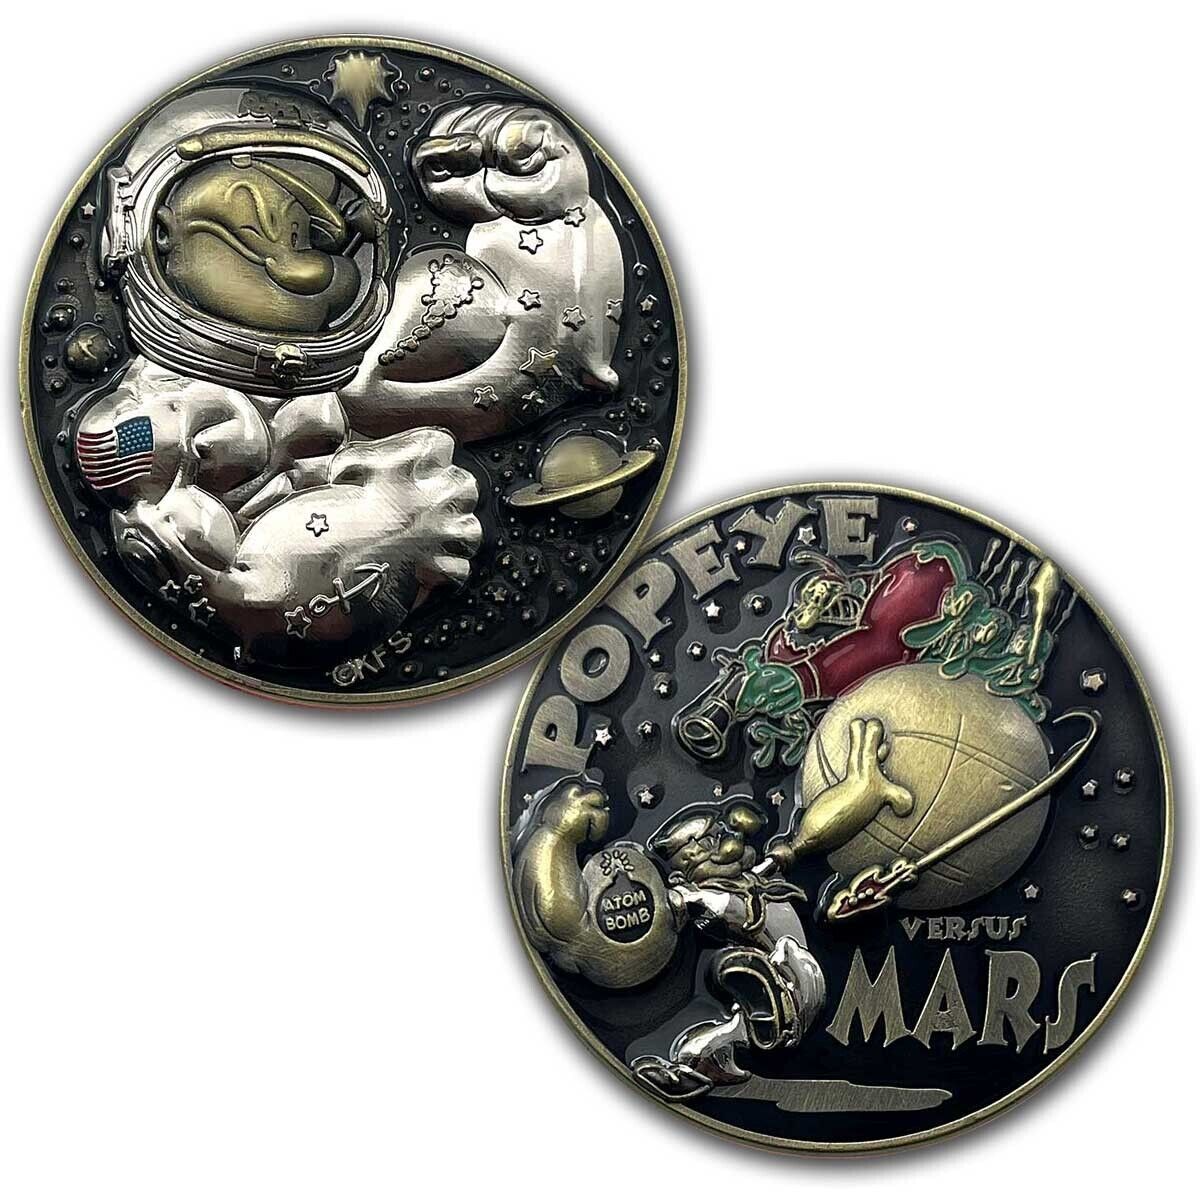 Popeye The Sailorman Verses Mars Vintage Collectible Challenge Coin